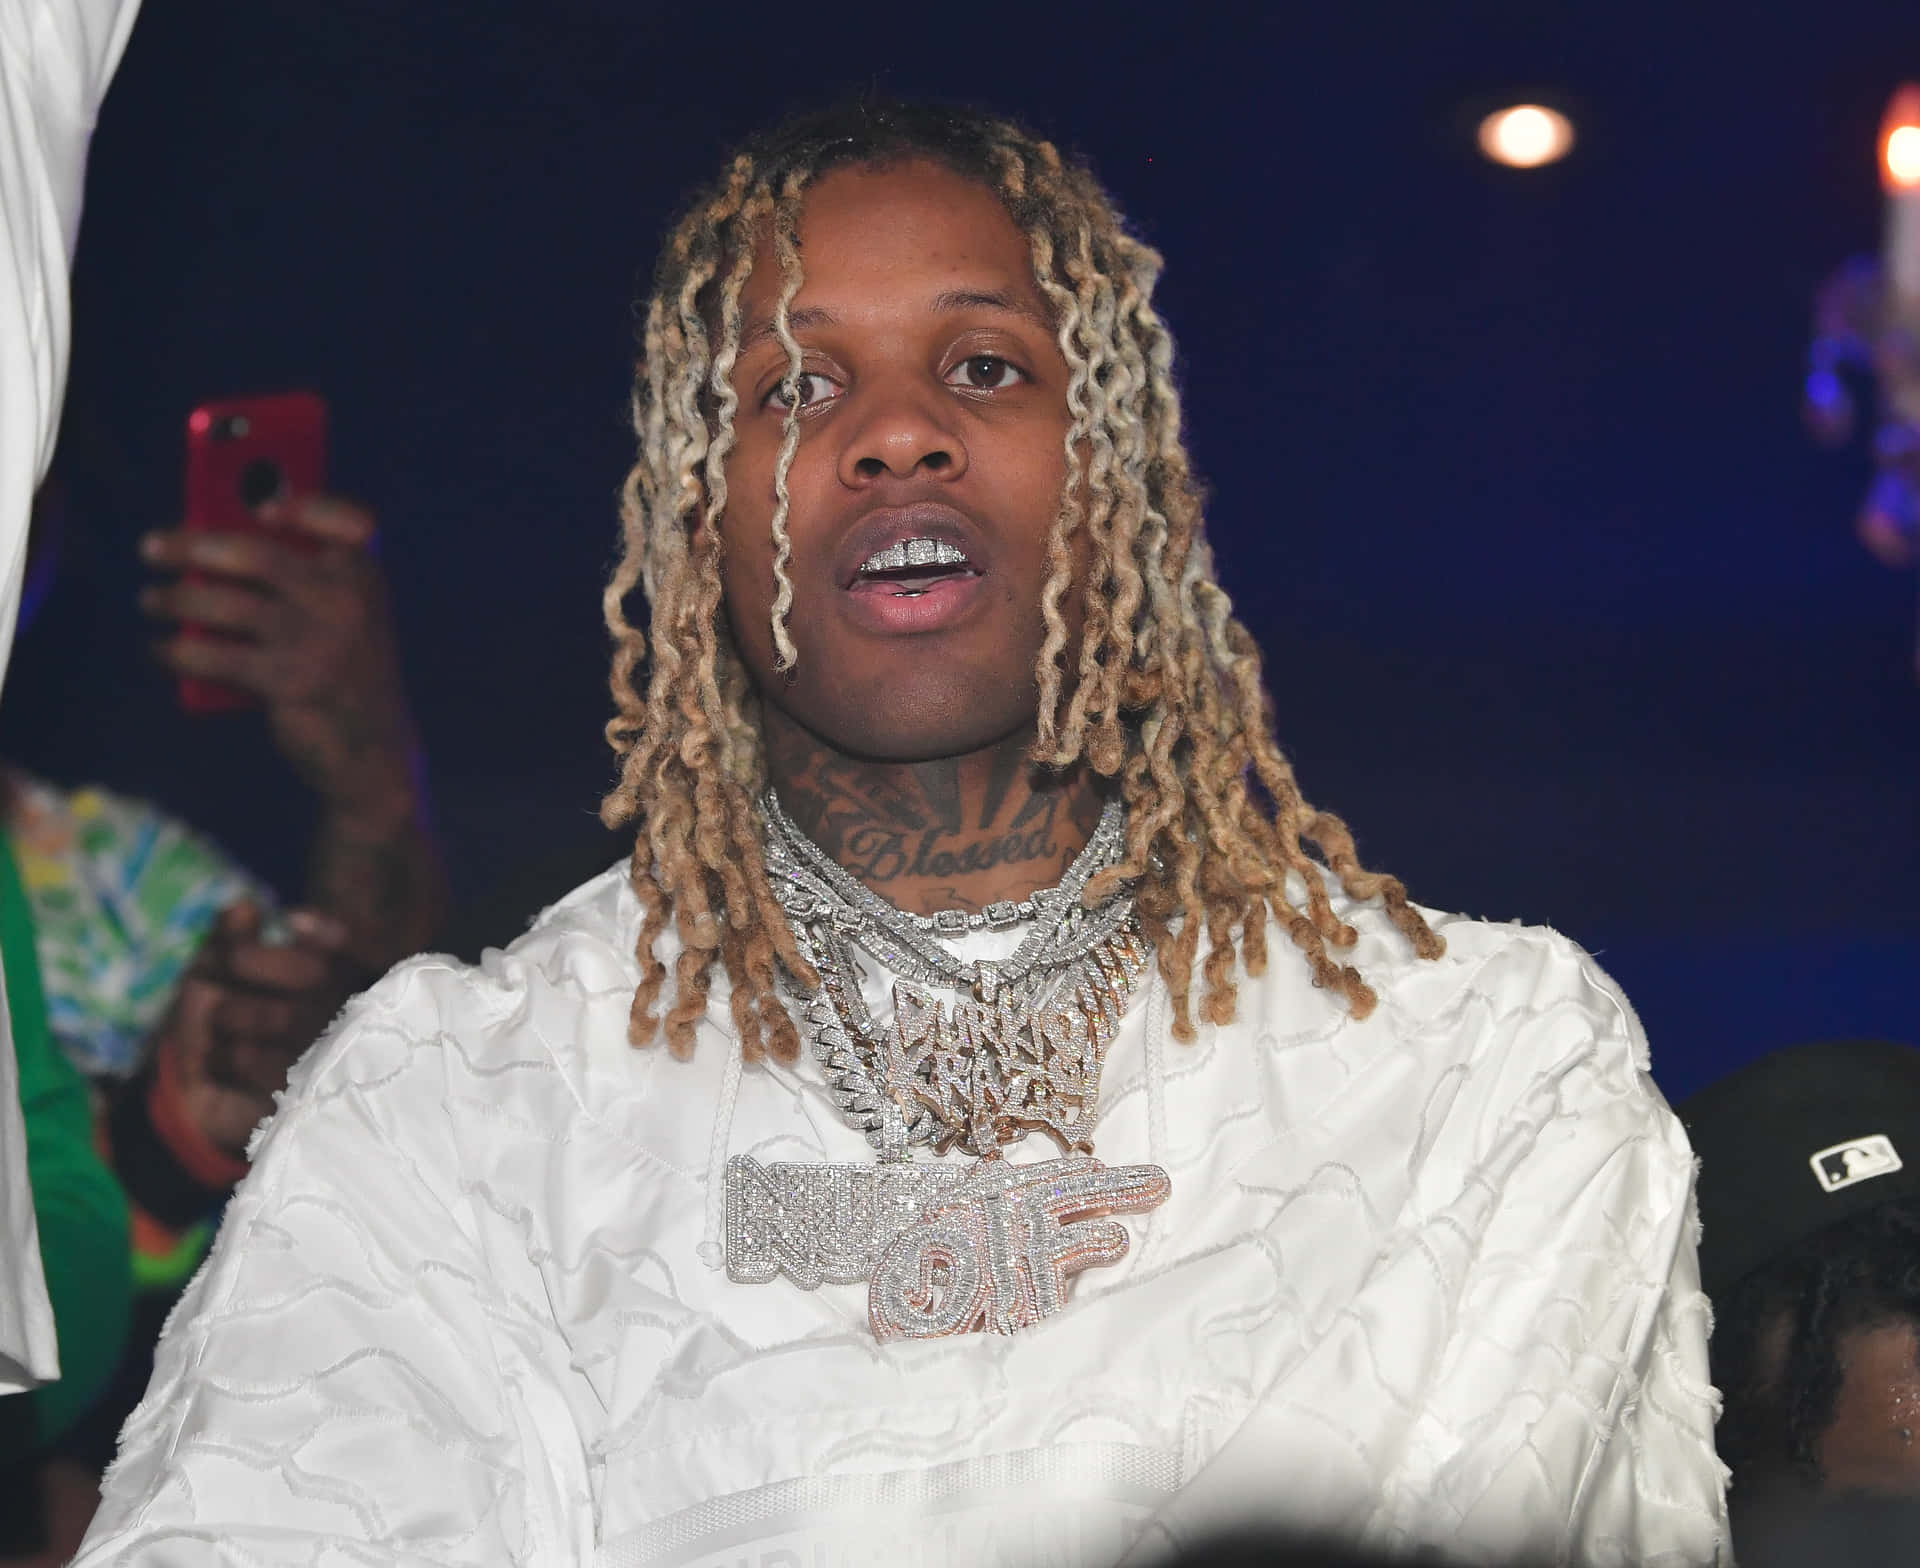 American rapper and songwriter, Lil Durk